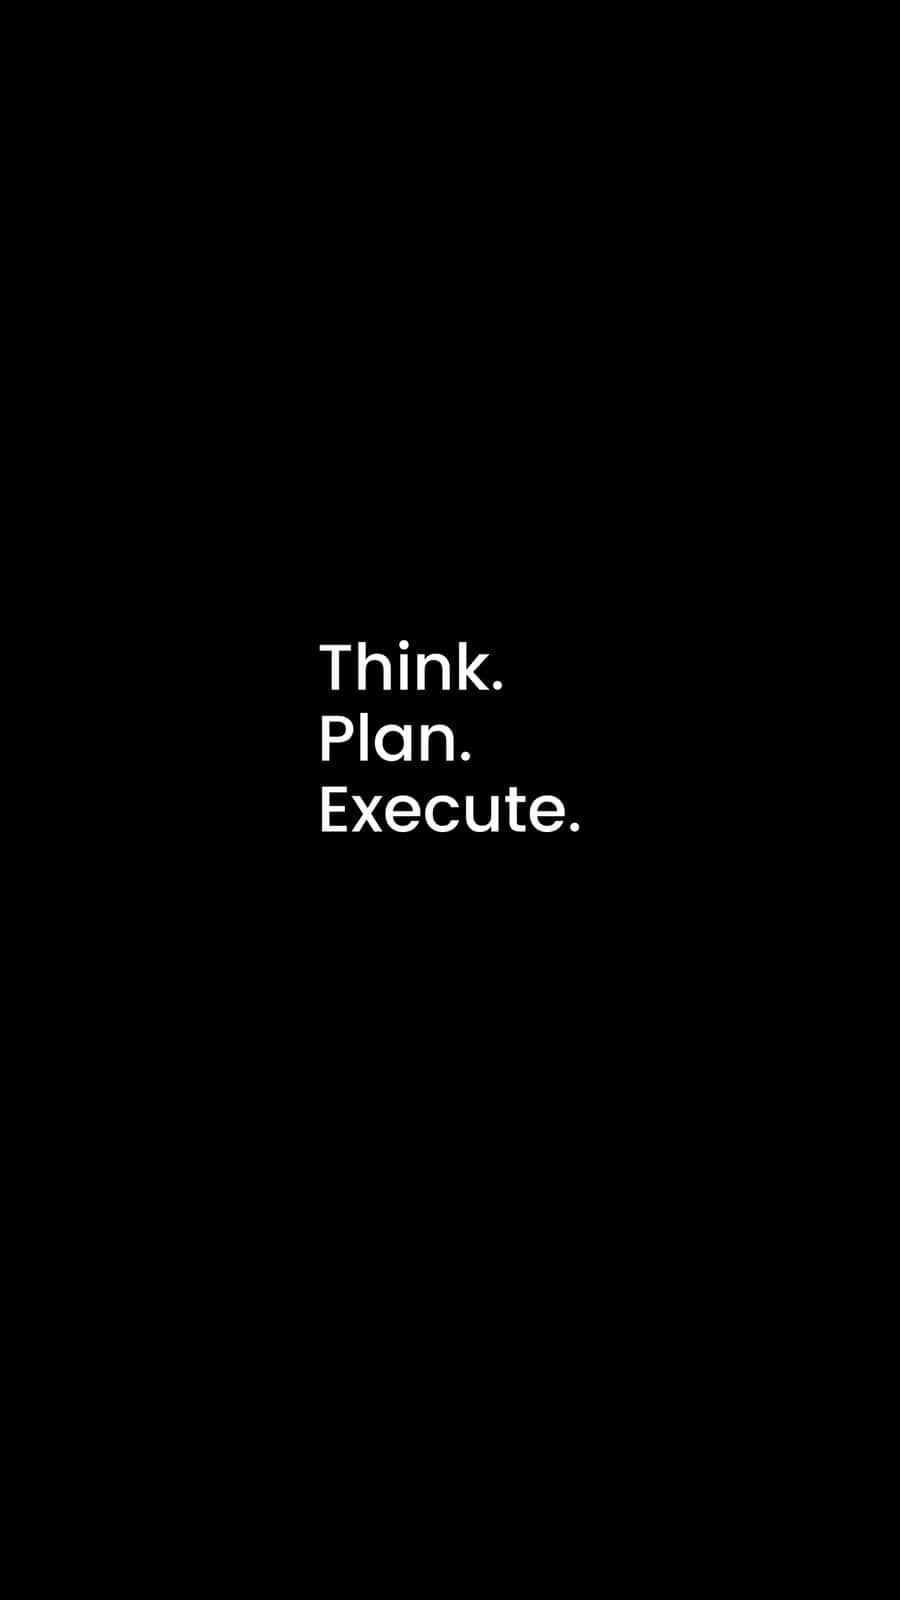 Black And White Quotes Simple Think Plan Execute Wallpaper